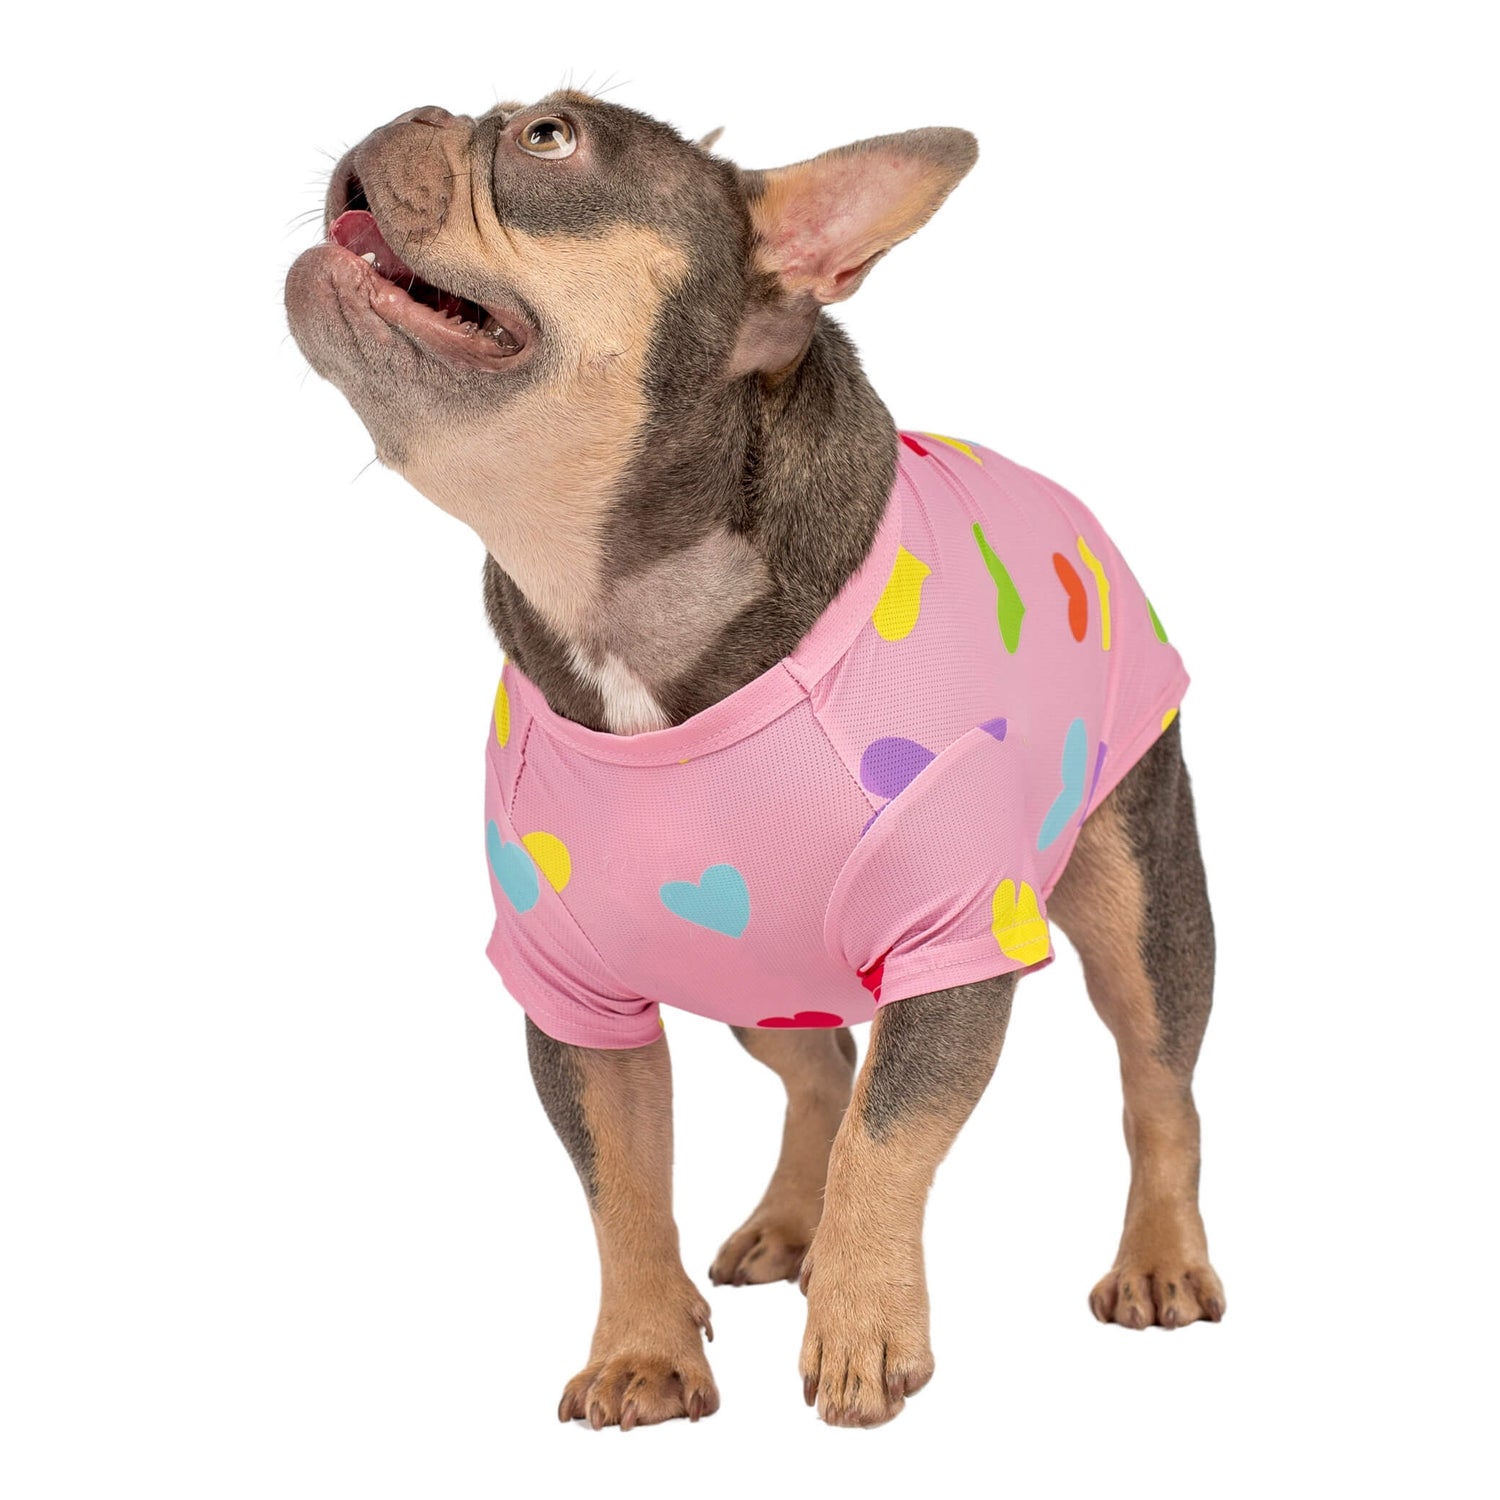 A french bulldog wearing a pink shirt with orange, blue, yellow, and green love hearts printed on it.  This shirt for dogs is designed to be wet to cool dogs down.